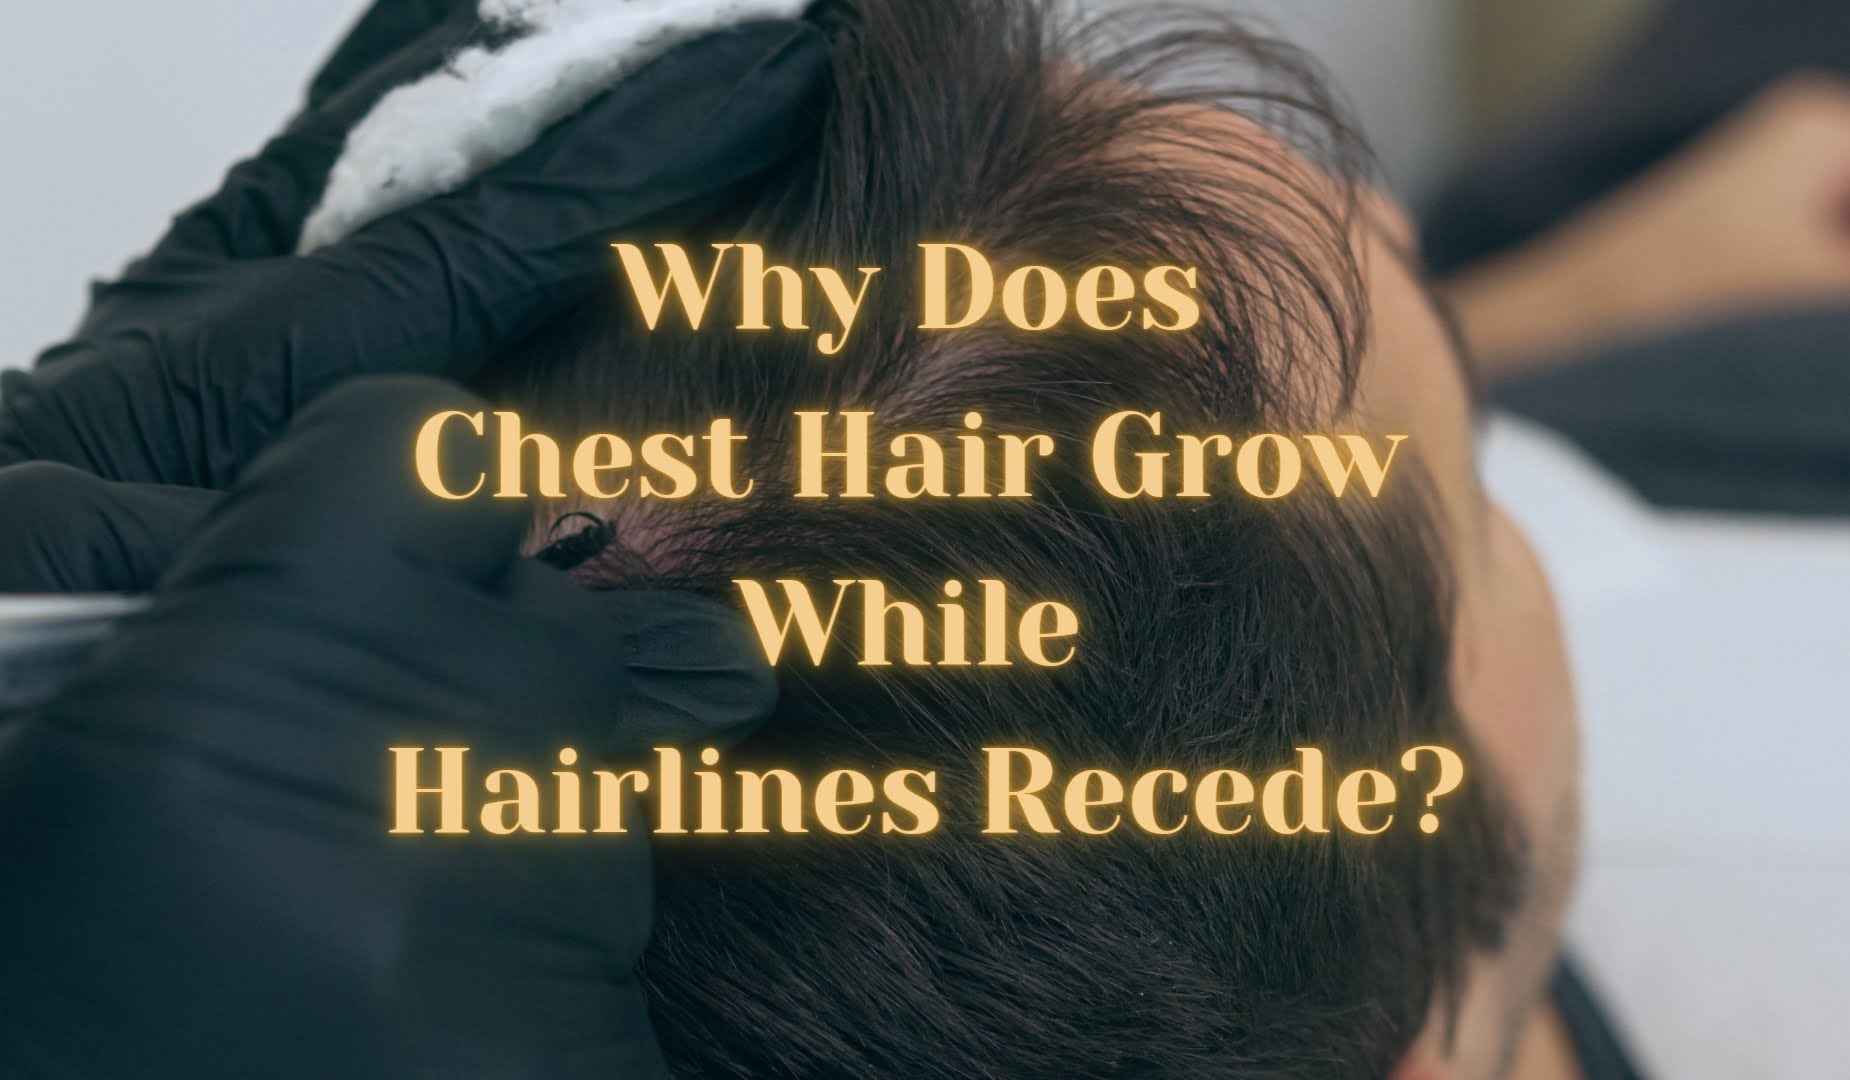 Why Does Chest Hair Grow While Hairlines Recede?